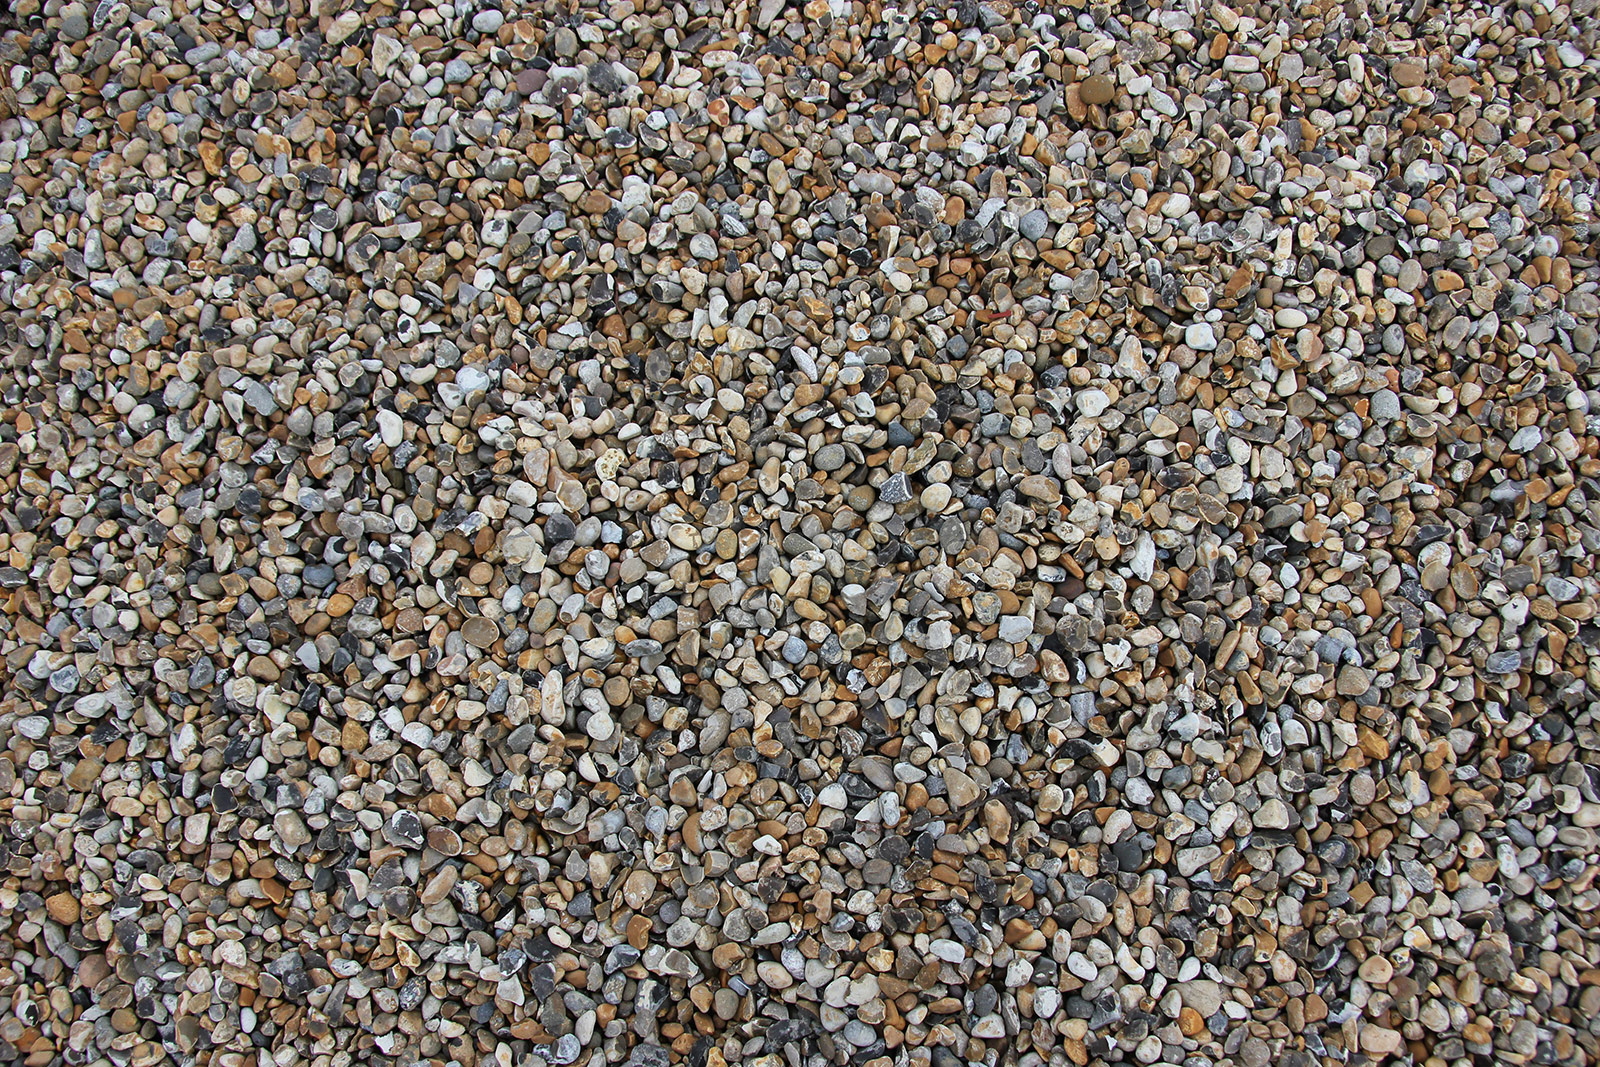 Gravel Stones suppliers in london